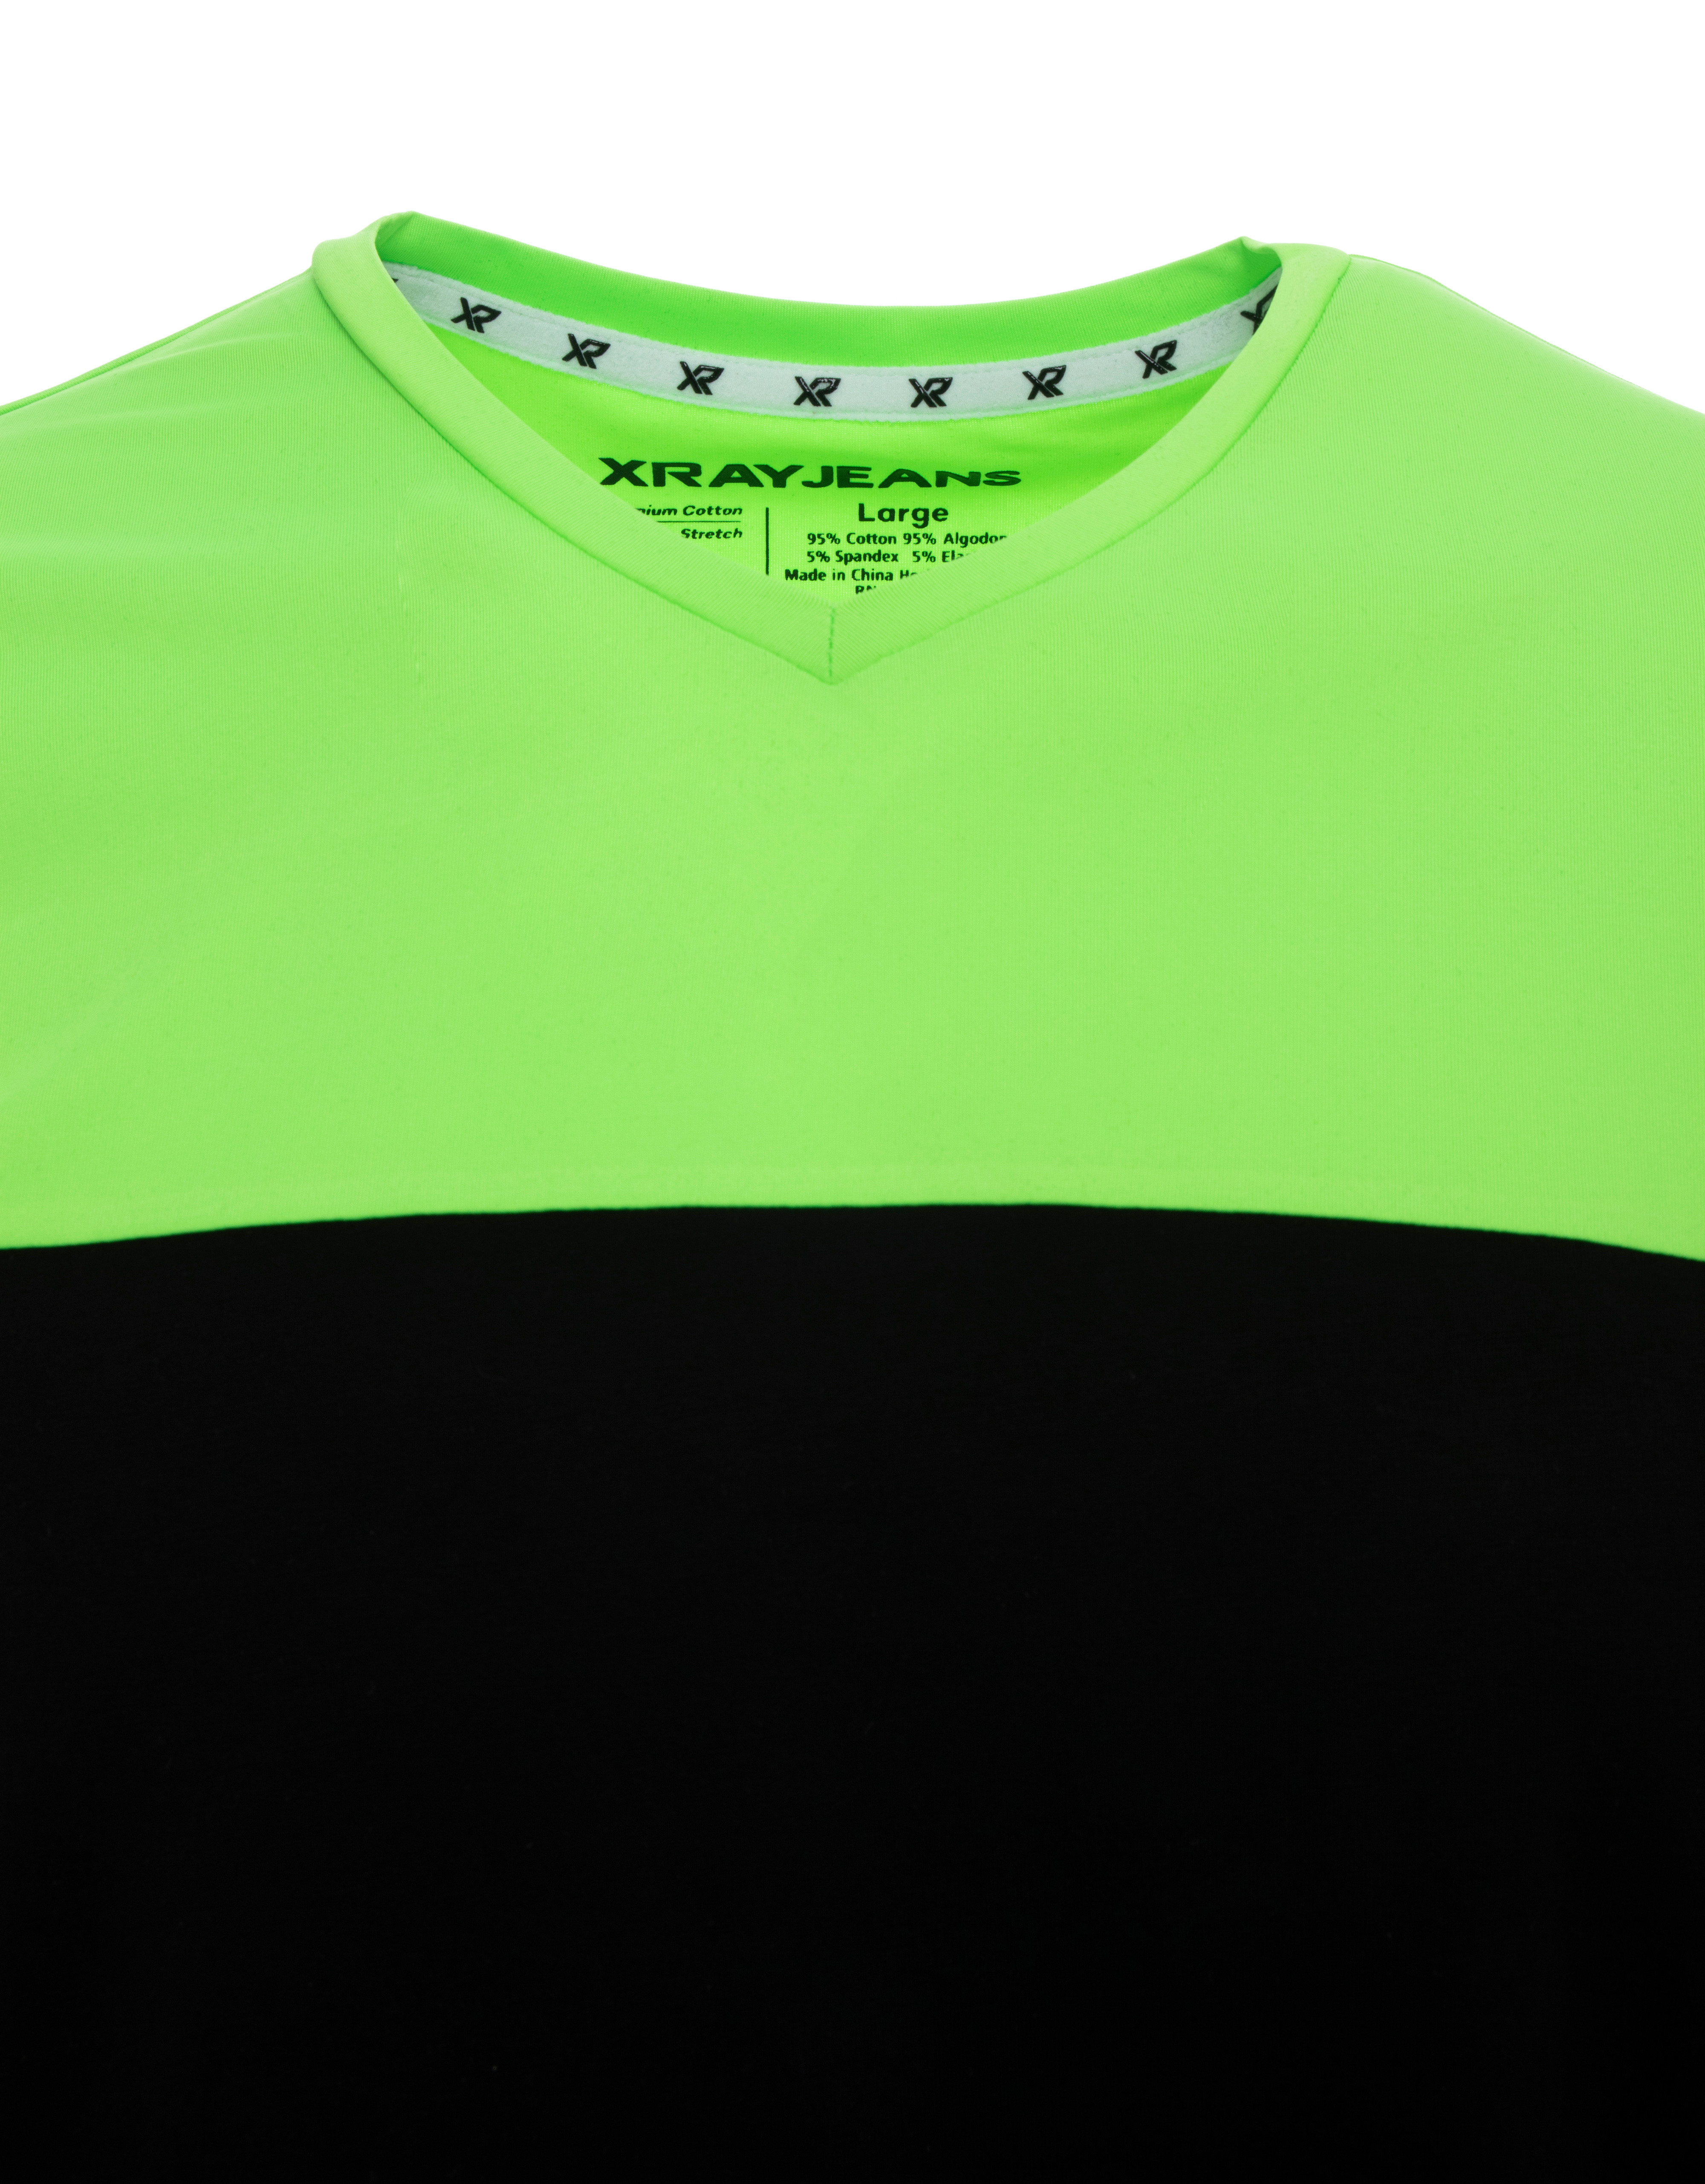 X RAY Men's Soft Stretch Cotton Solid Colorblock Short Sleeve V-Neck Slim Fit T-Shirt, Fashion Sport Casual Tee for Men, Black/Neon Green Size Large - image 3 of 4